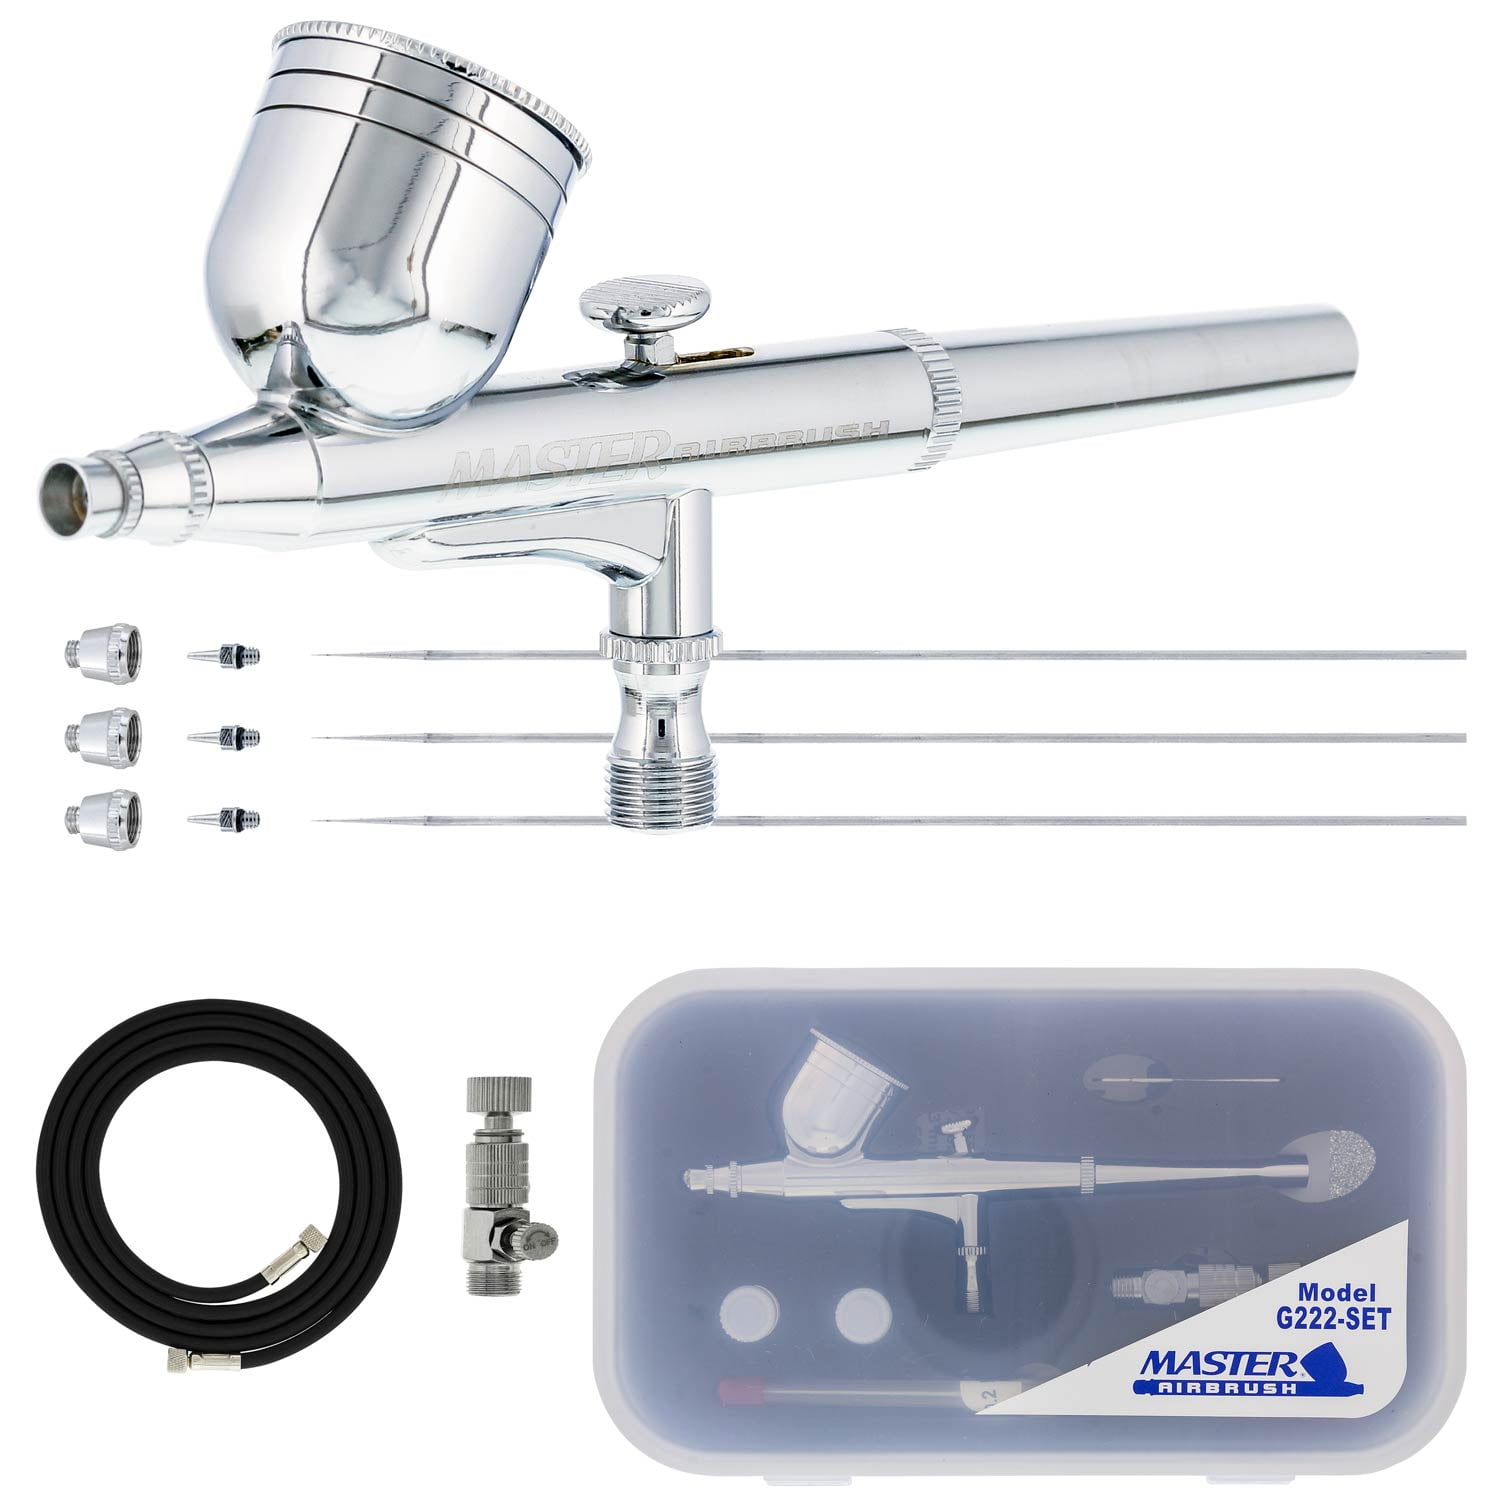 Master Airbrush Airbrushing System Kit with a G23 Multi-Purpose Gravity  Feed Dual-Action Airbrush with 1/3oz. Cup and 0.3mm Tip, Mini Air  Compressor, Hose, Storage Case, How-to-Airbrush ARC Link Card 